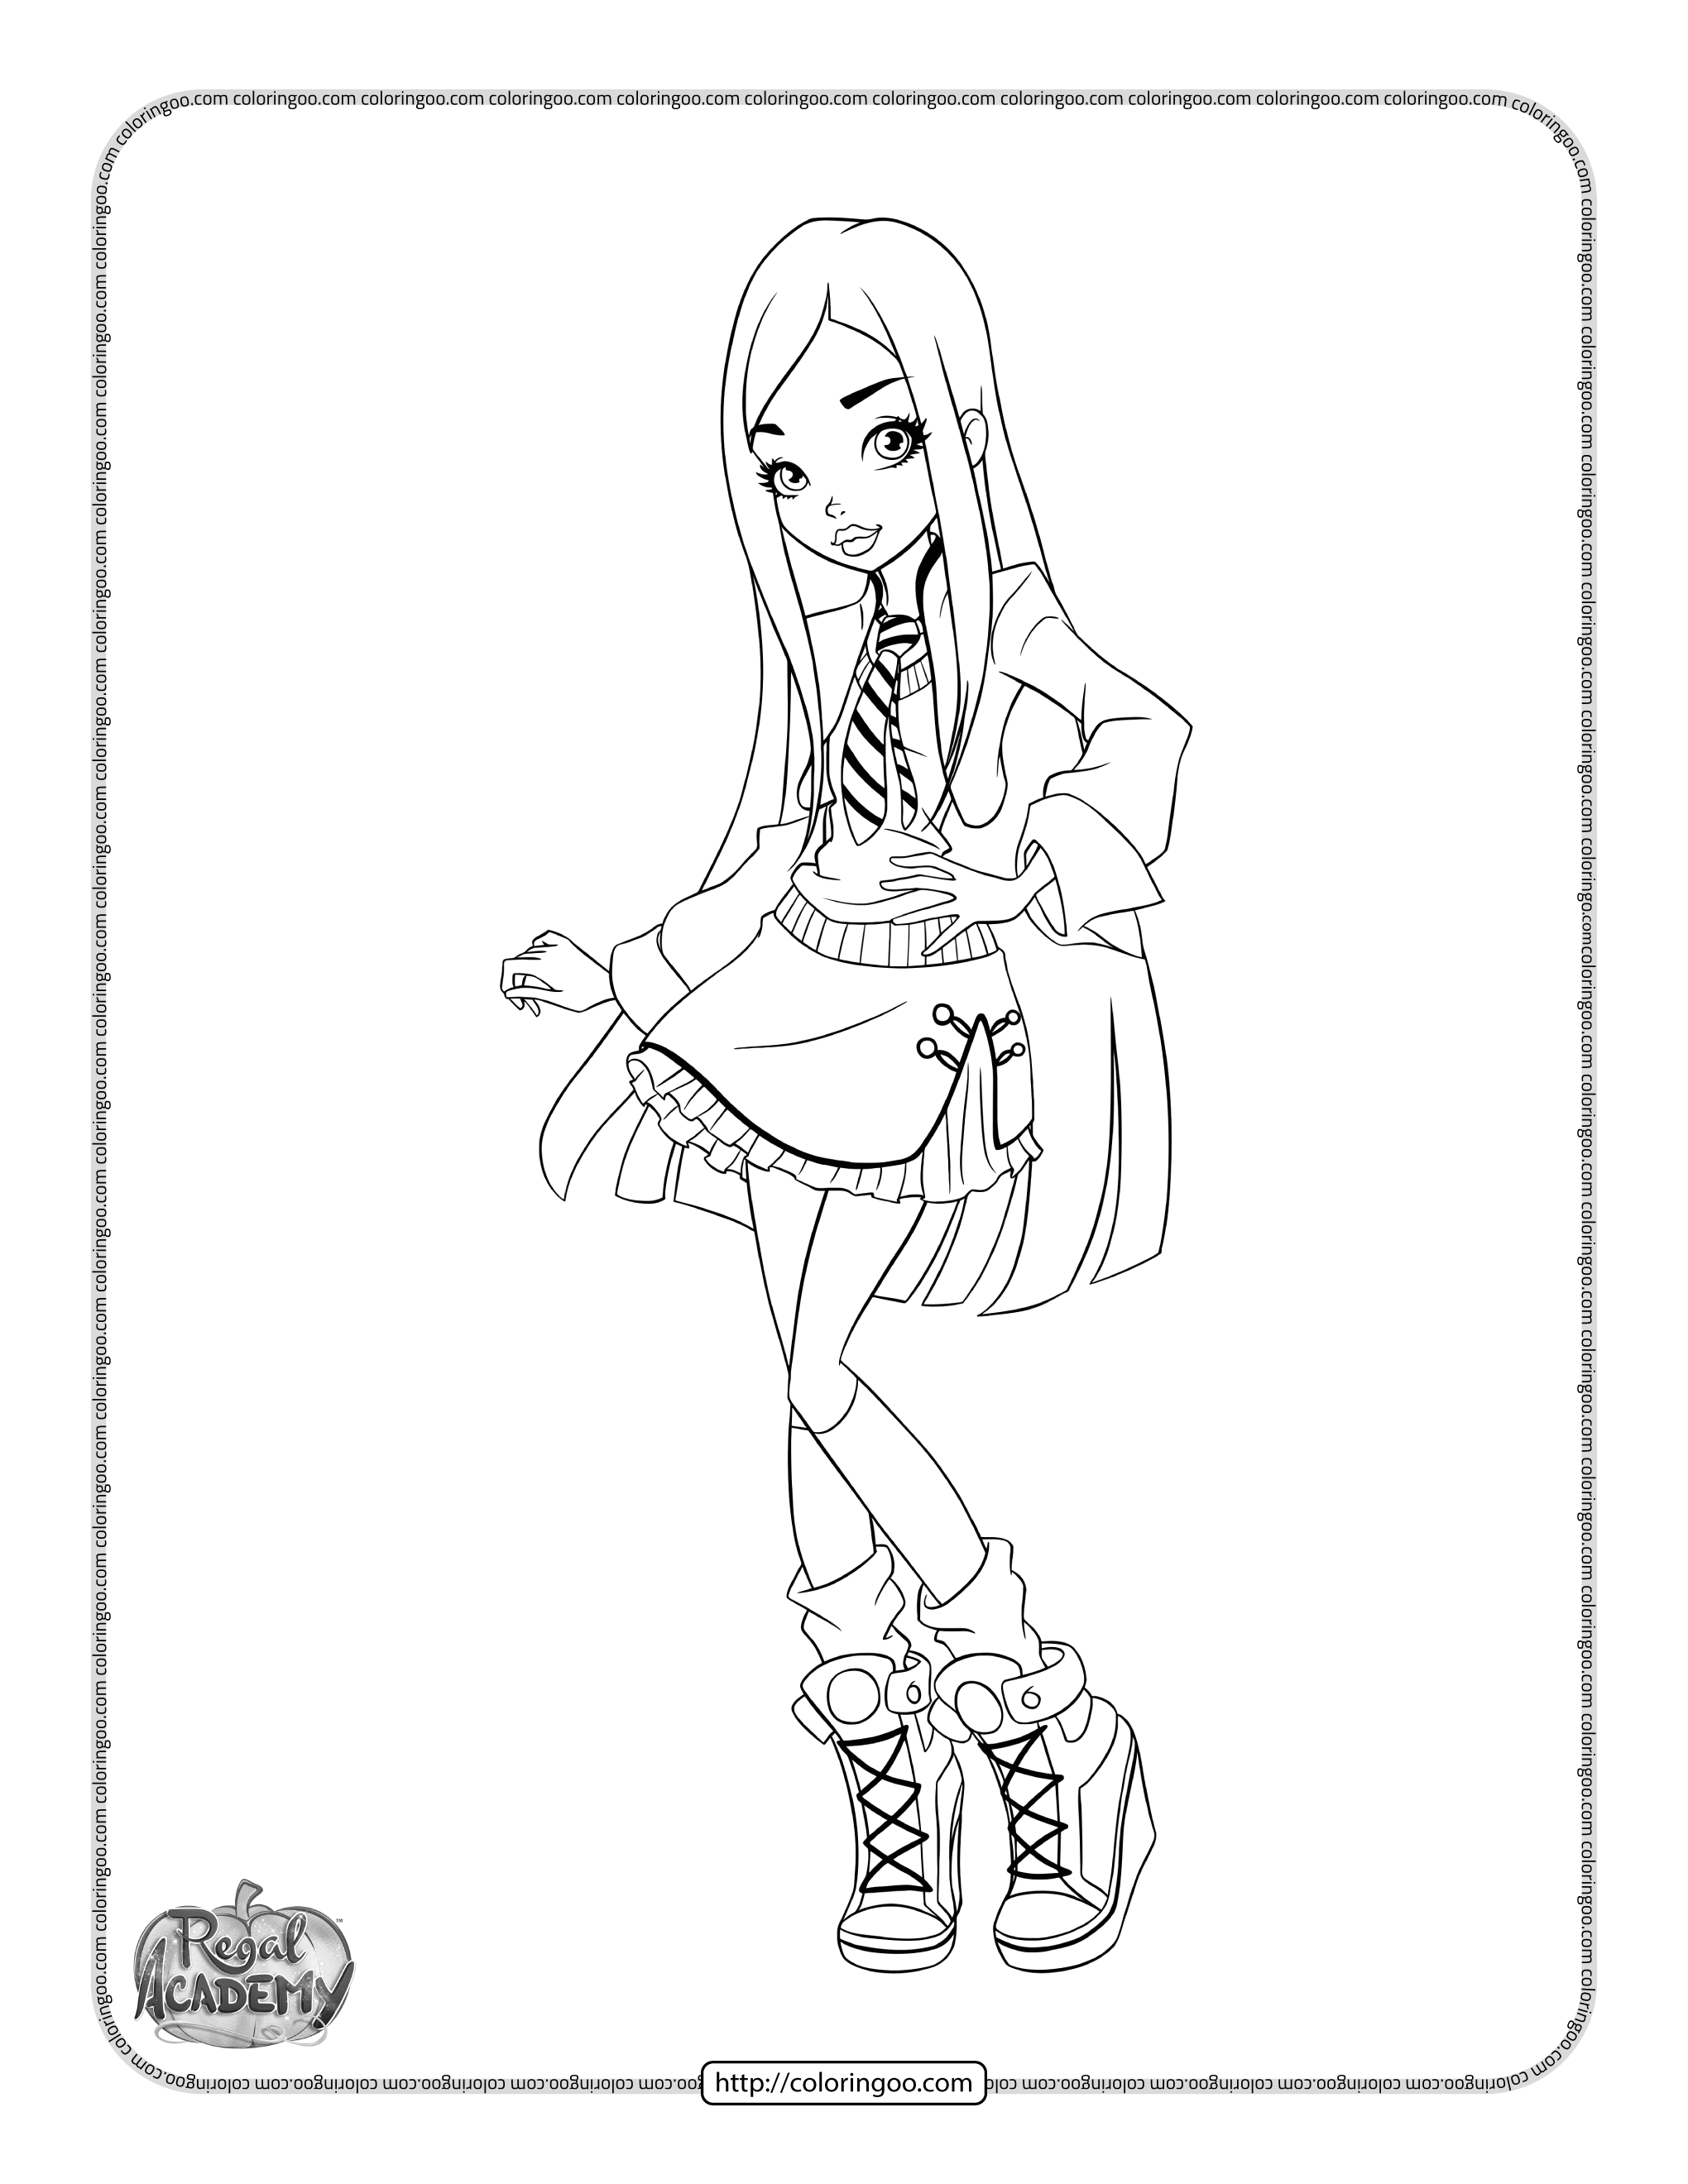 regal academy lingling iron fan coloring pages